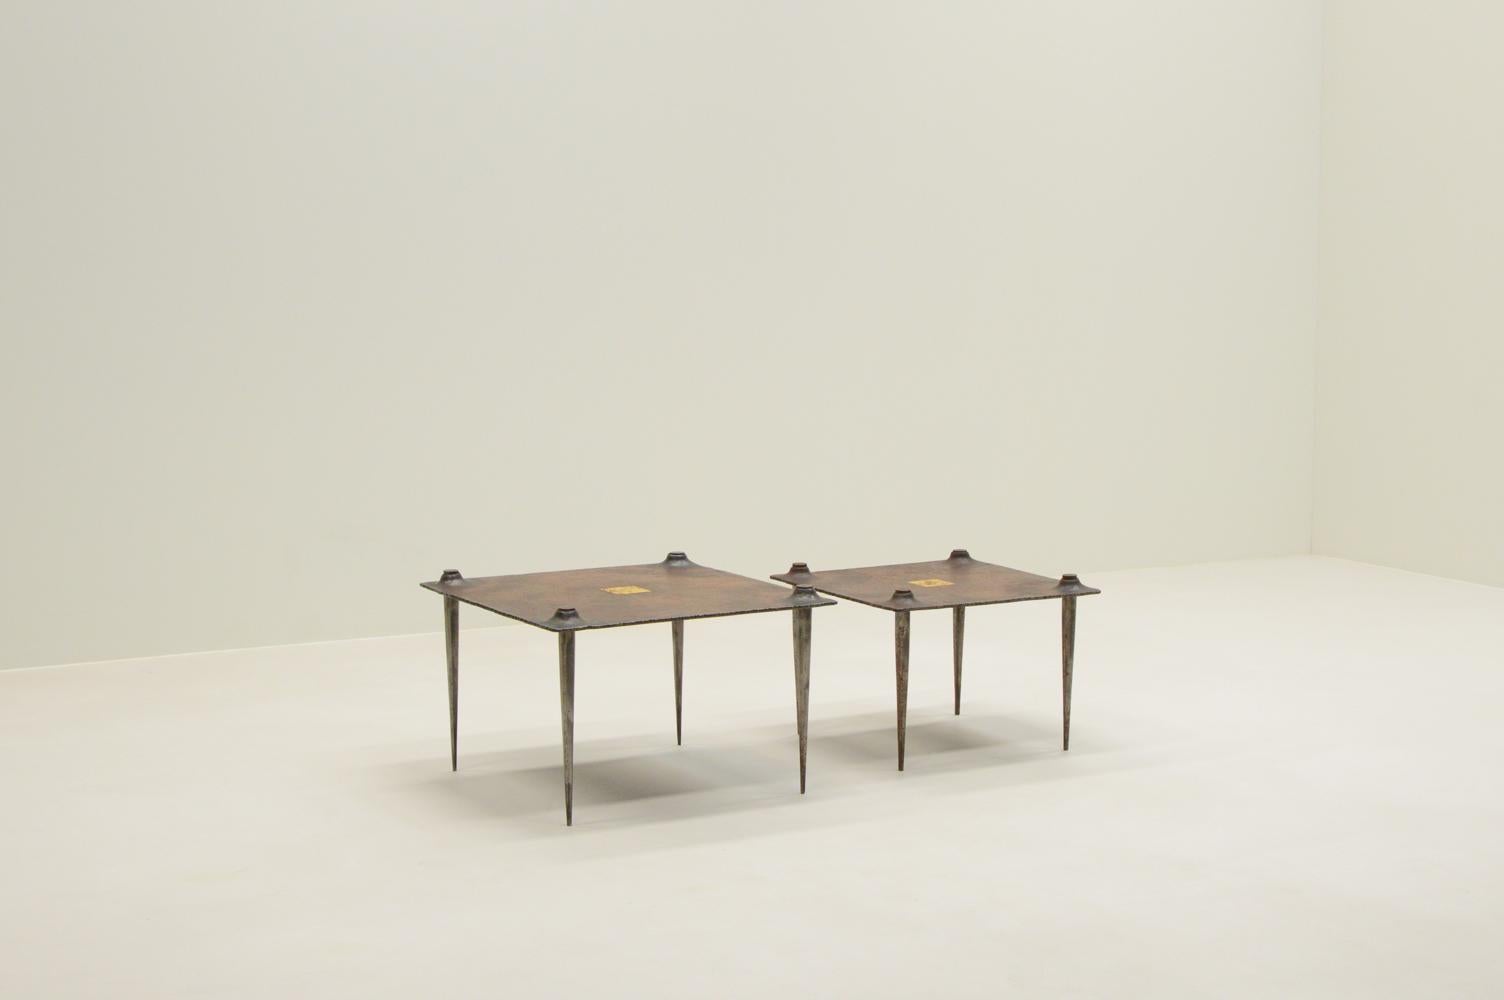 Brutalist side / coffee tables by Idir Mecibah for Smederij Moerman, 1990s Belgium. These tables are part of the Scrab series. Made of forged steel. In the center is a gold leaf square. Idir died at a young age and most of his designs aren’t